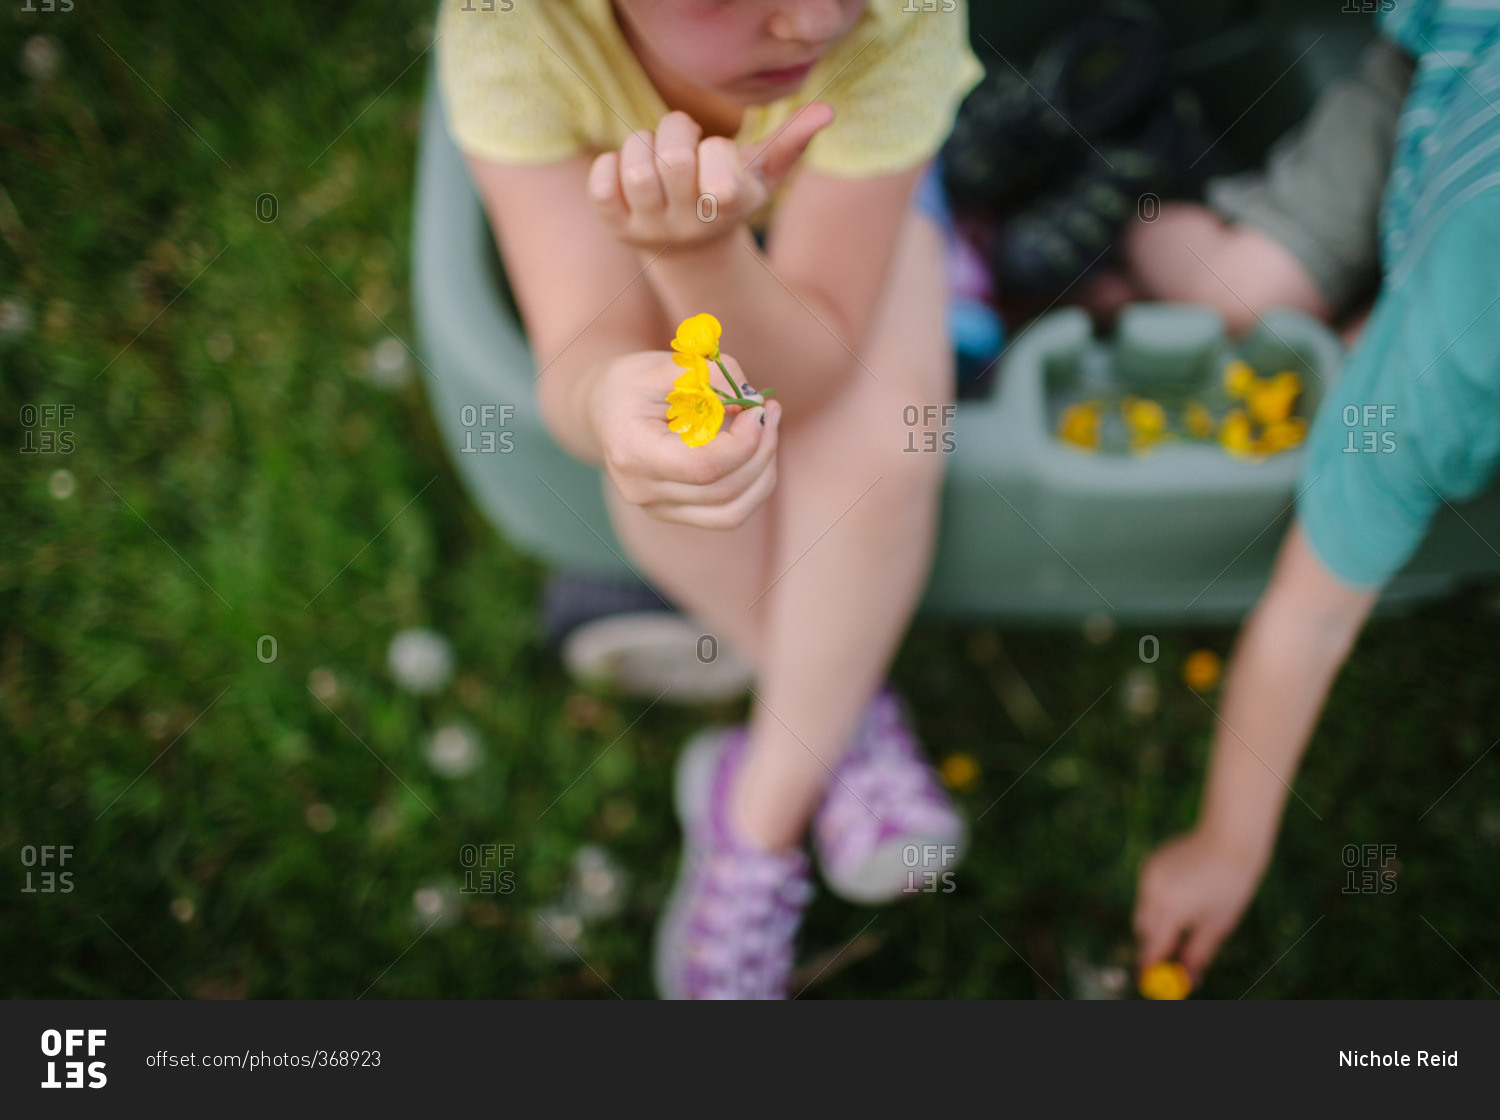 Children sitting in a green wagon holding yellow flowers